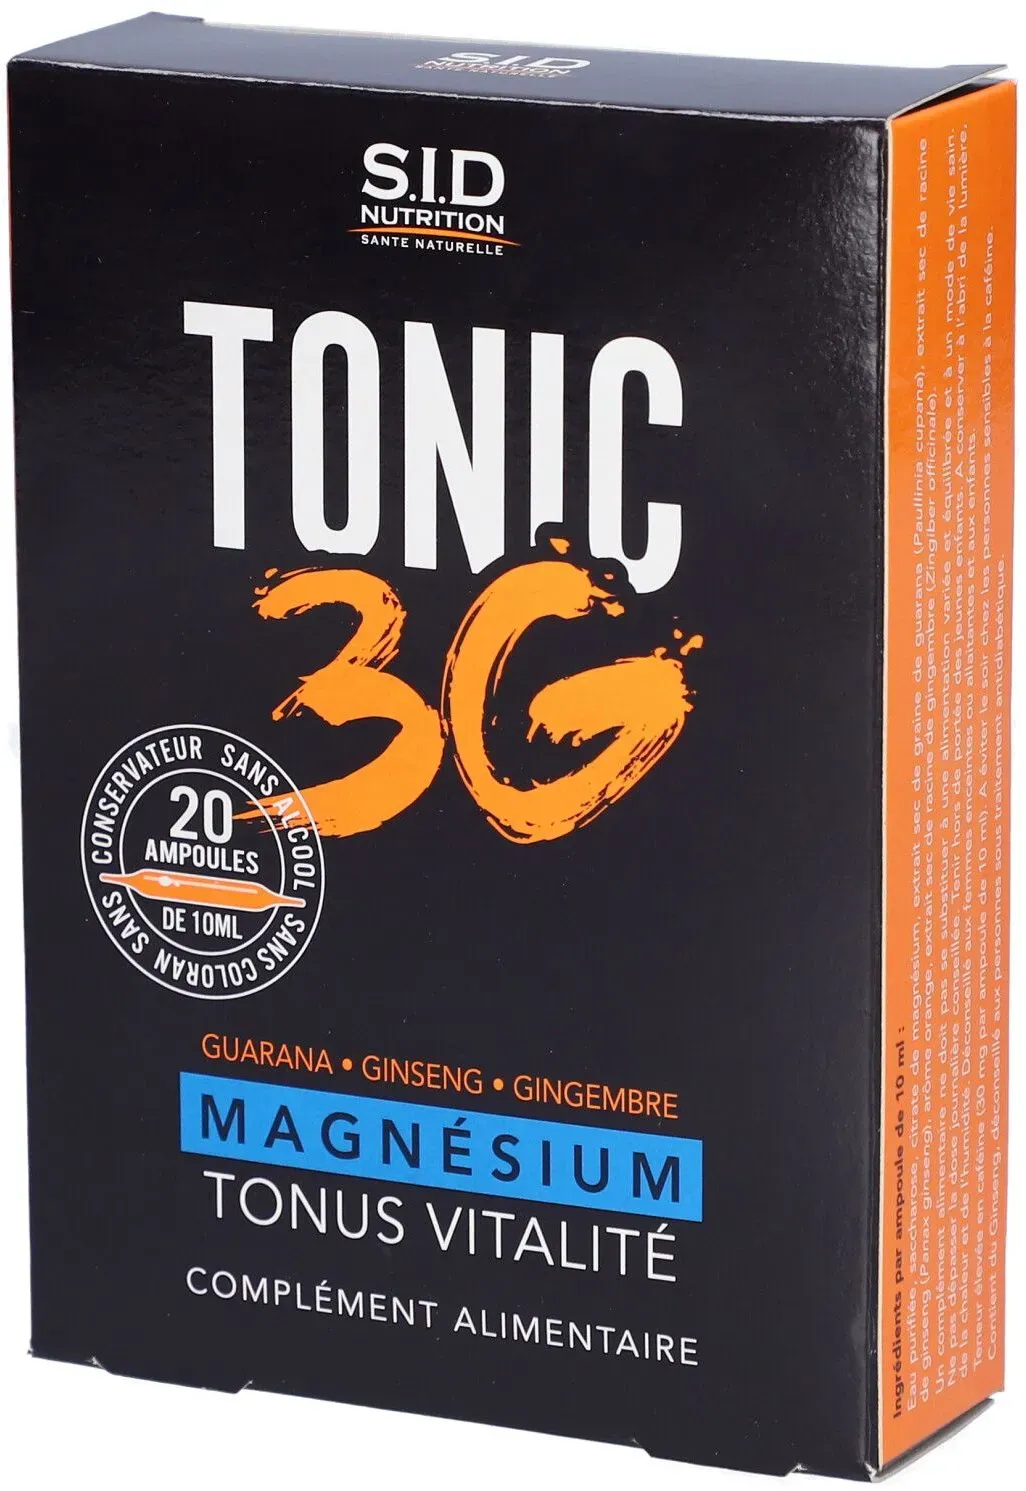 SIDN TONIC 3G AMP 20 200 ml solution orale